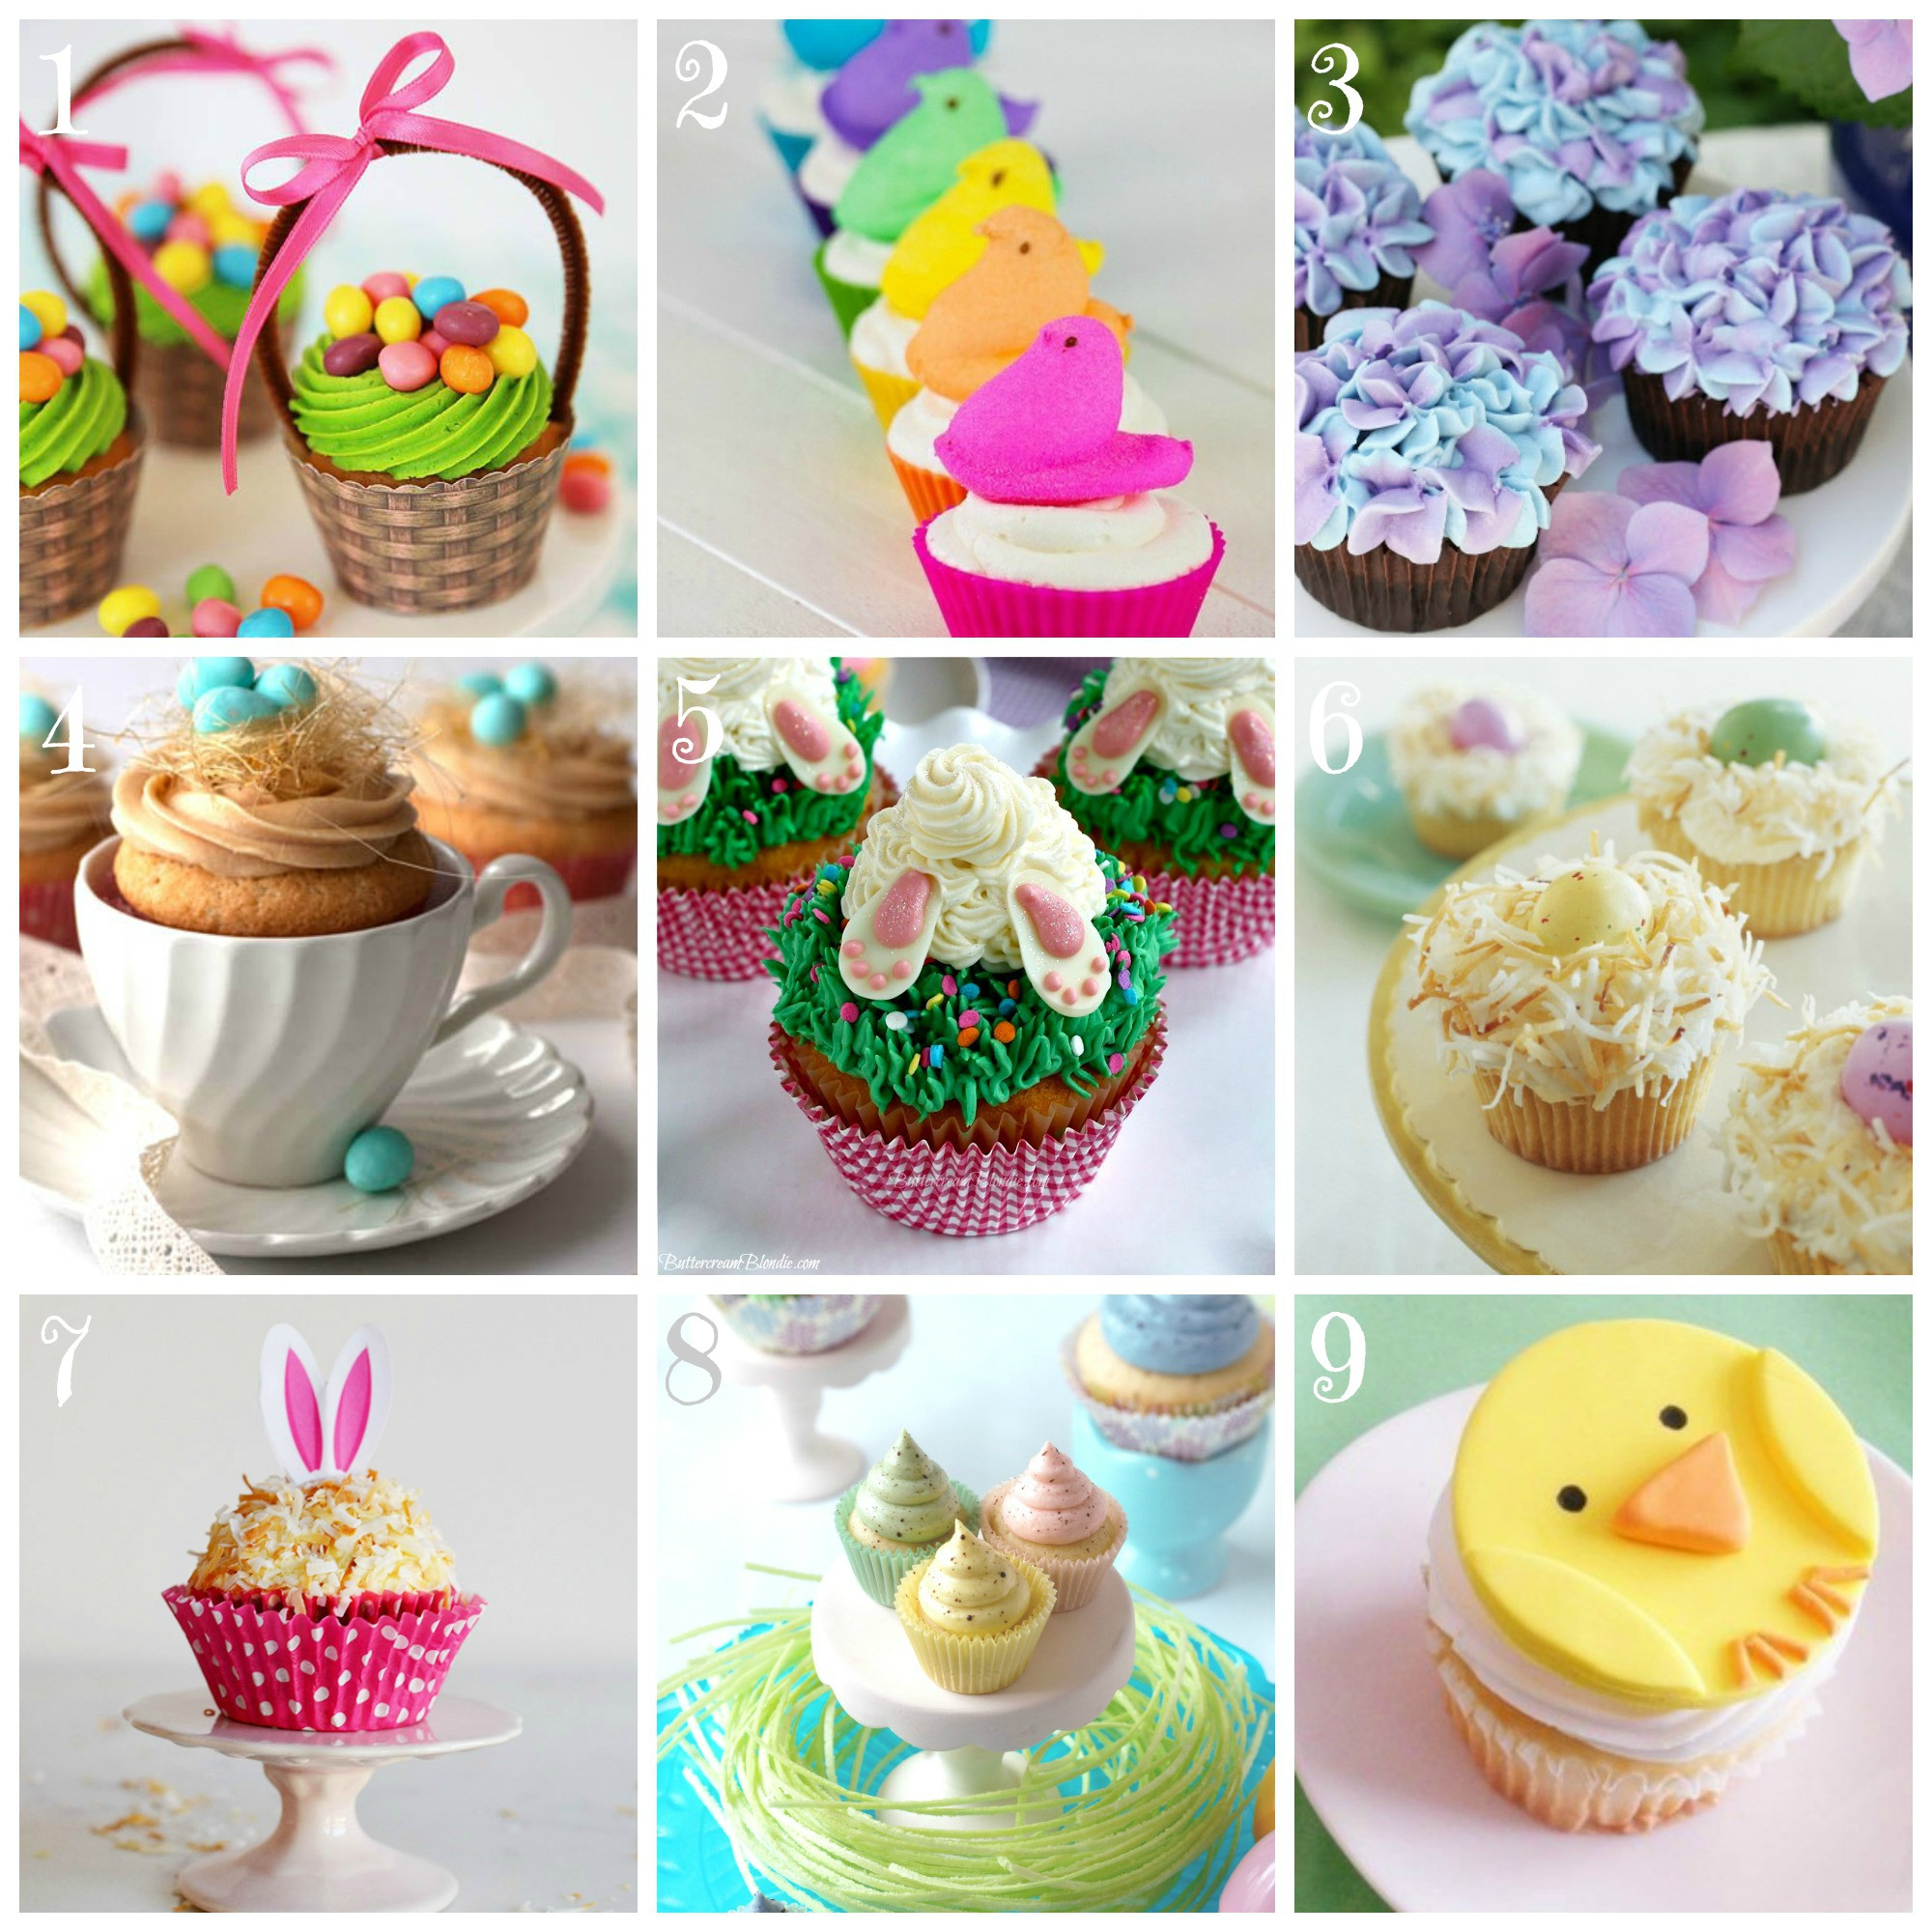 Cupcake Easter Desserts
 Top 9 Easter Cupcake Recipes